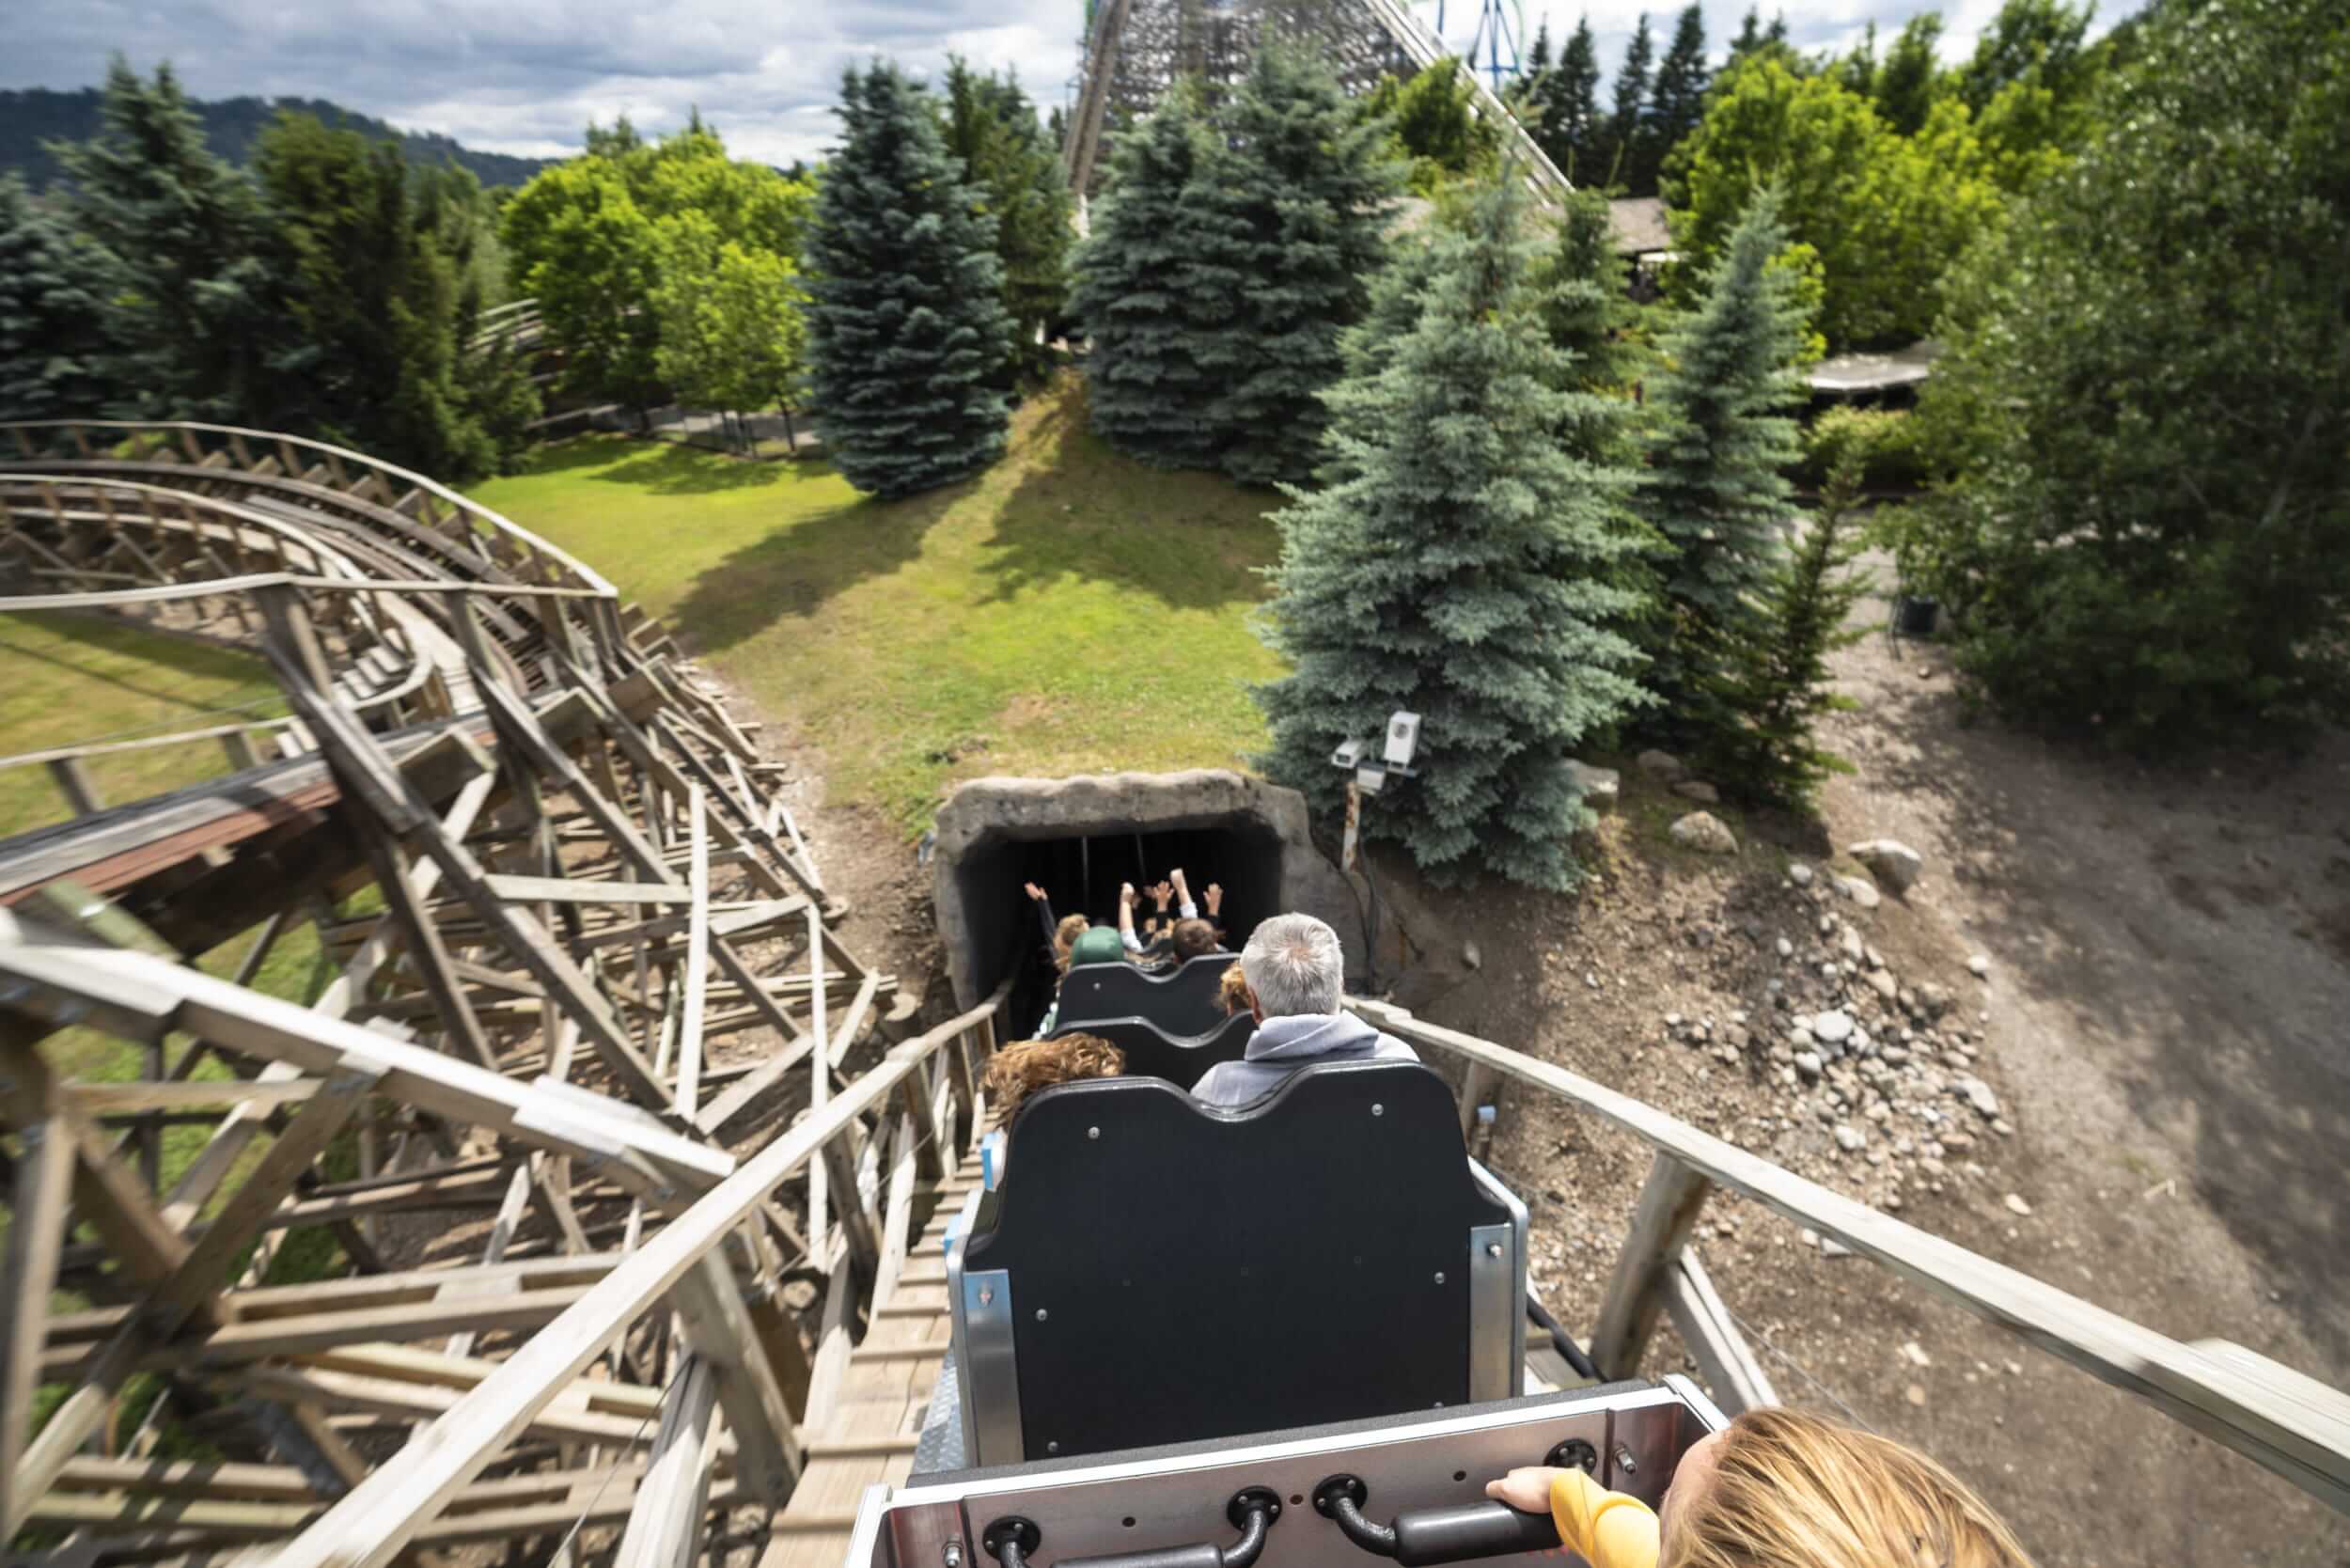 Visitors riding a wooden roller coaster at Silverwood Theme Park.